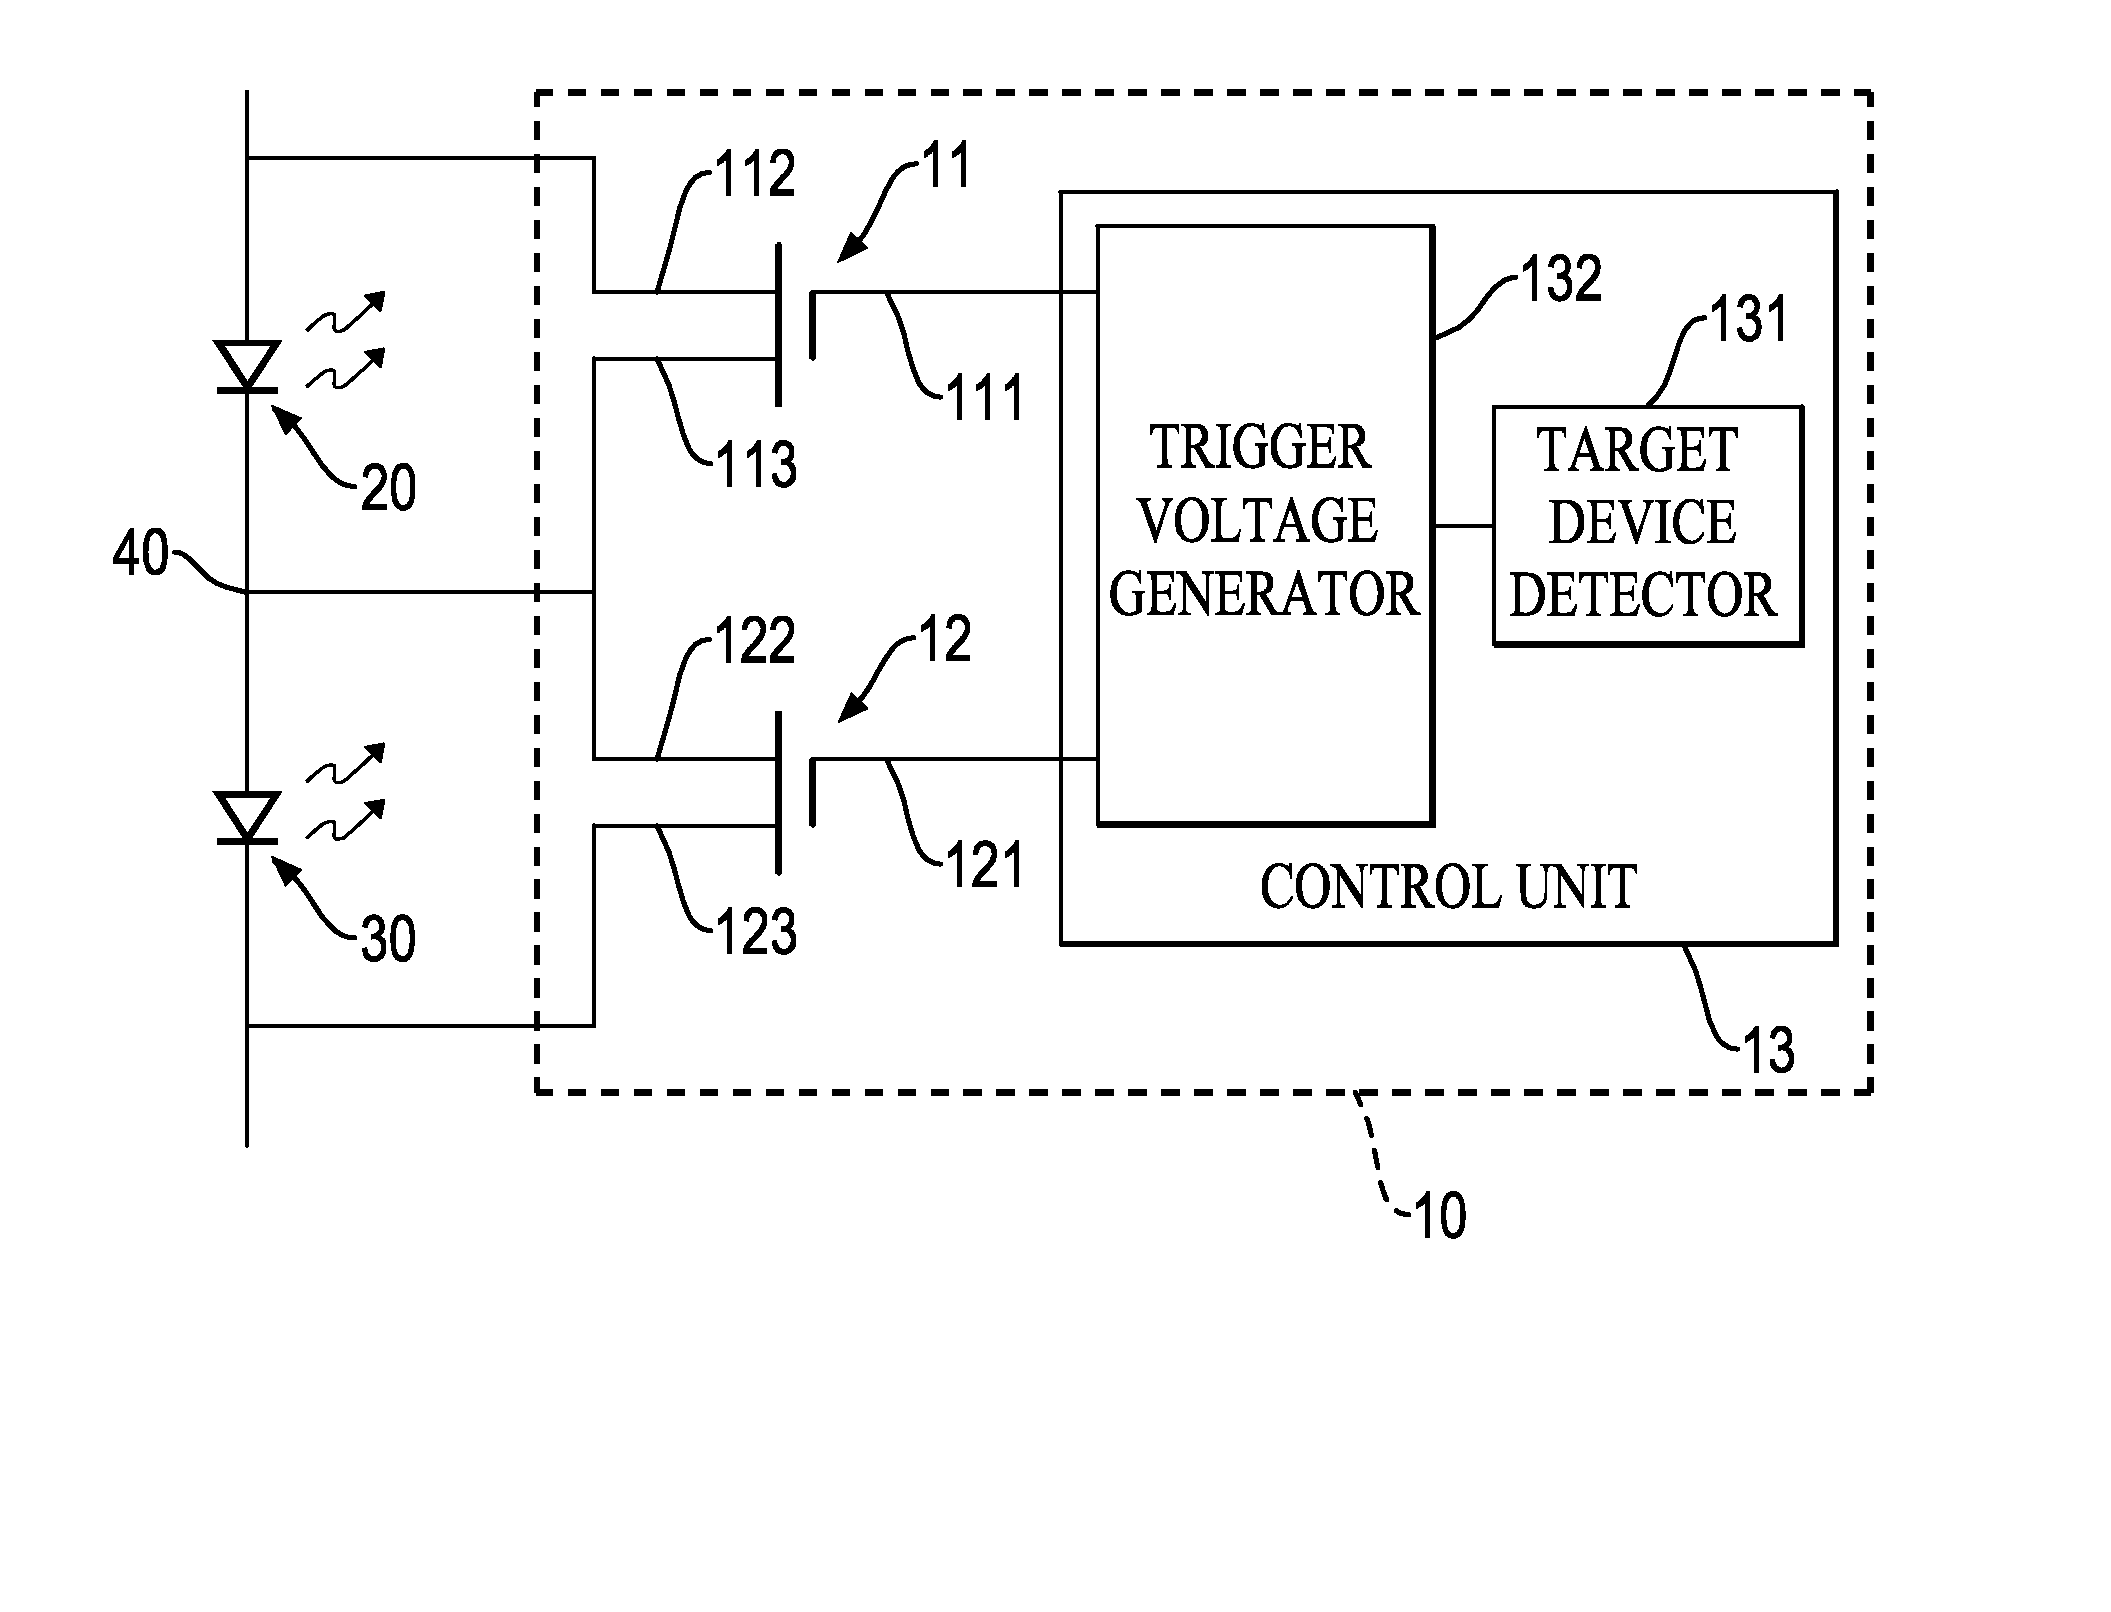 Shunt protection module and method for series connected devices